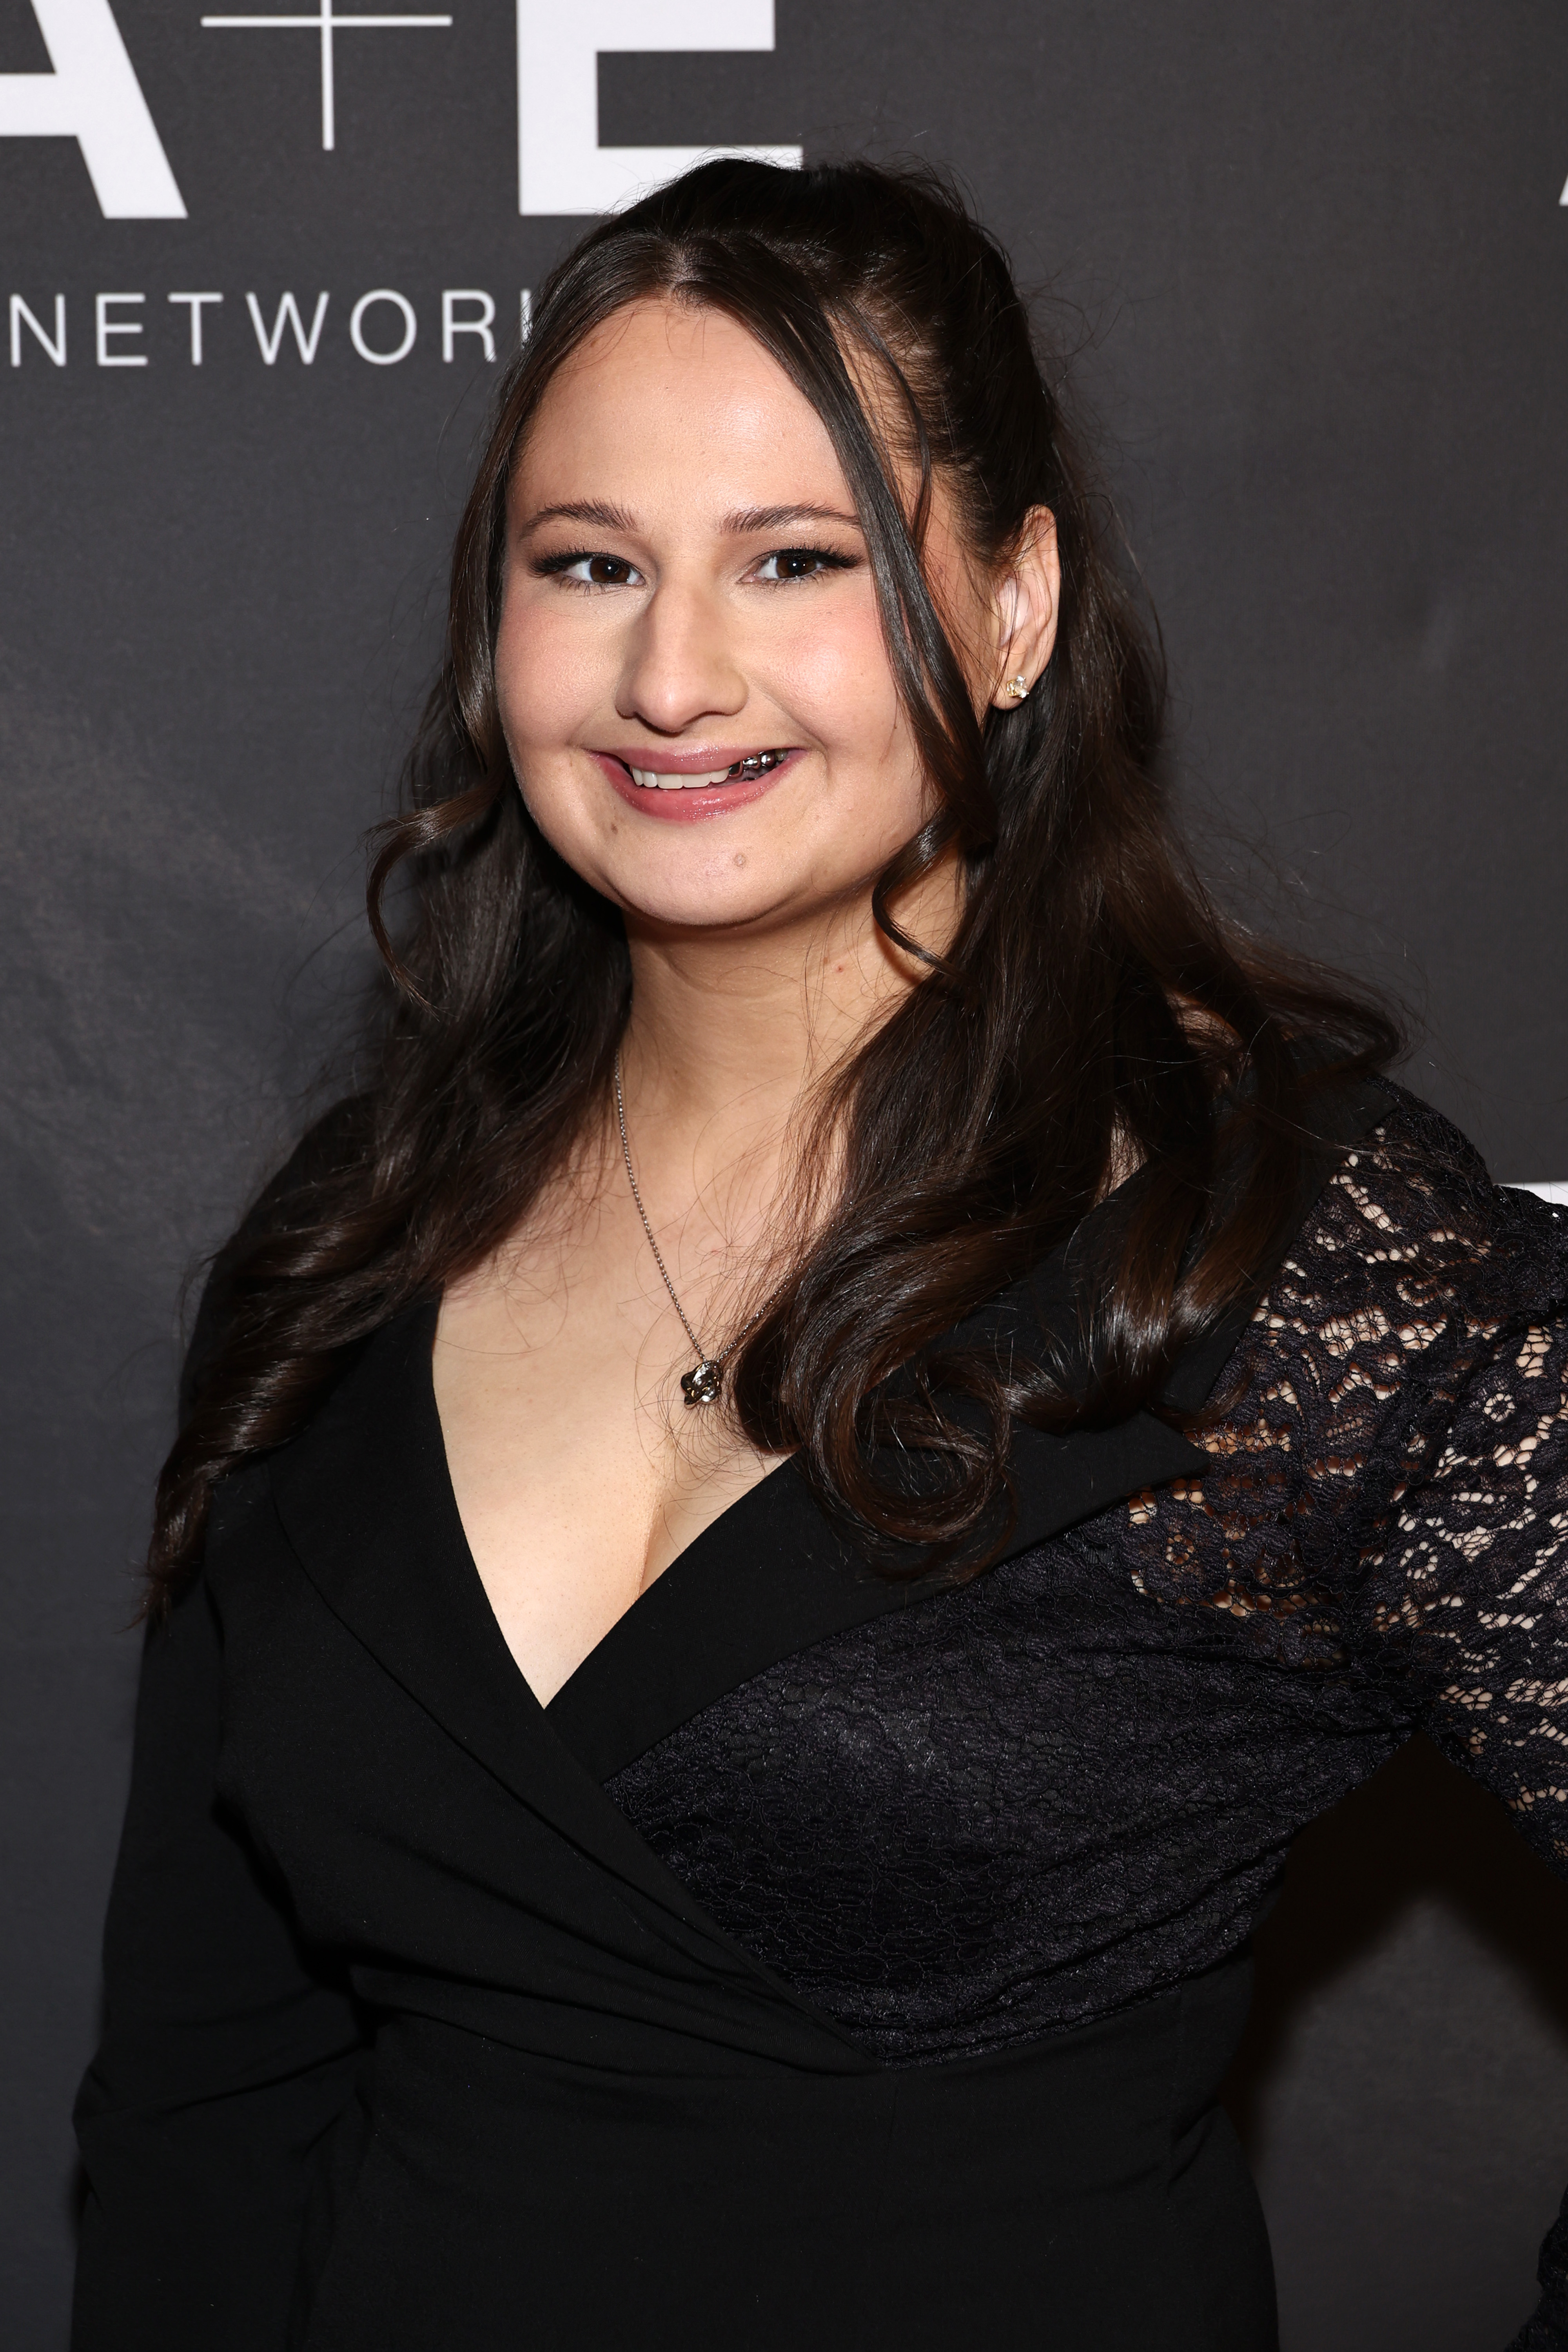 Gypsy Rose Blanchard attends "The Prison Confessions Of Gypsy Rose Blanchard" Red Carpet Event in New York City, on January 5, 2024. | Source: Getty Images